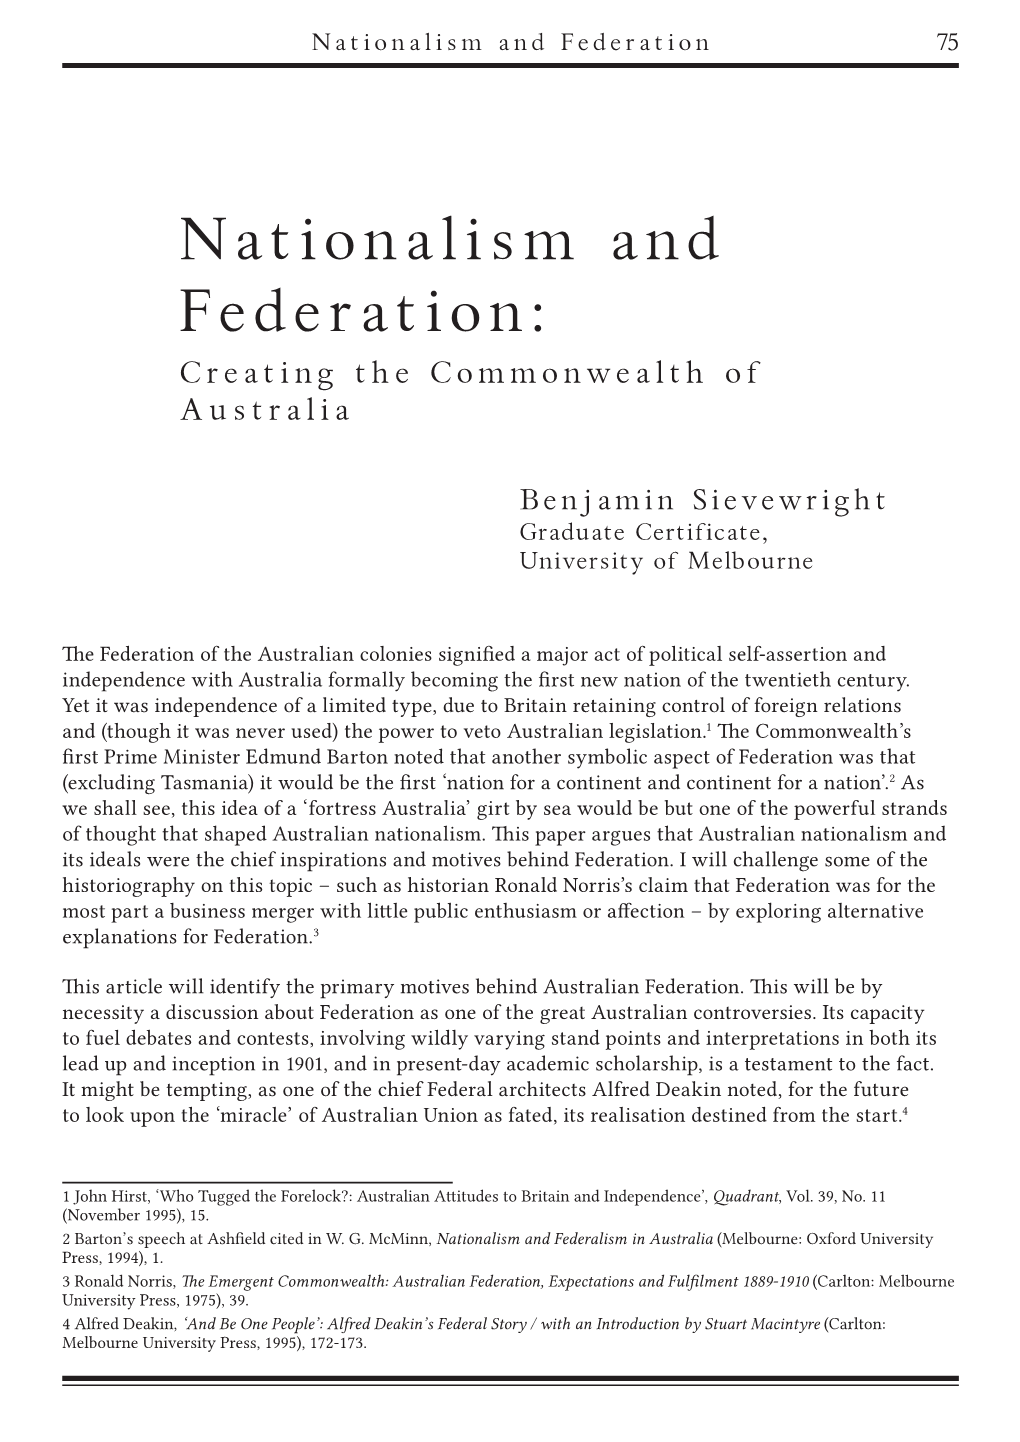 Nationalism and Federation: Creating the Commonwealth of Australia